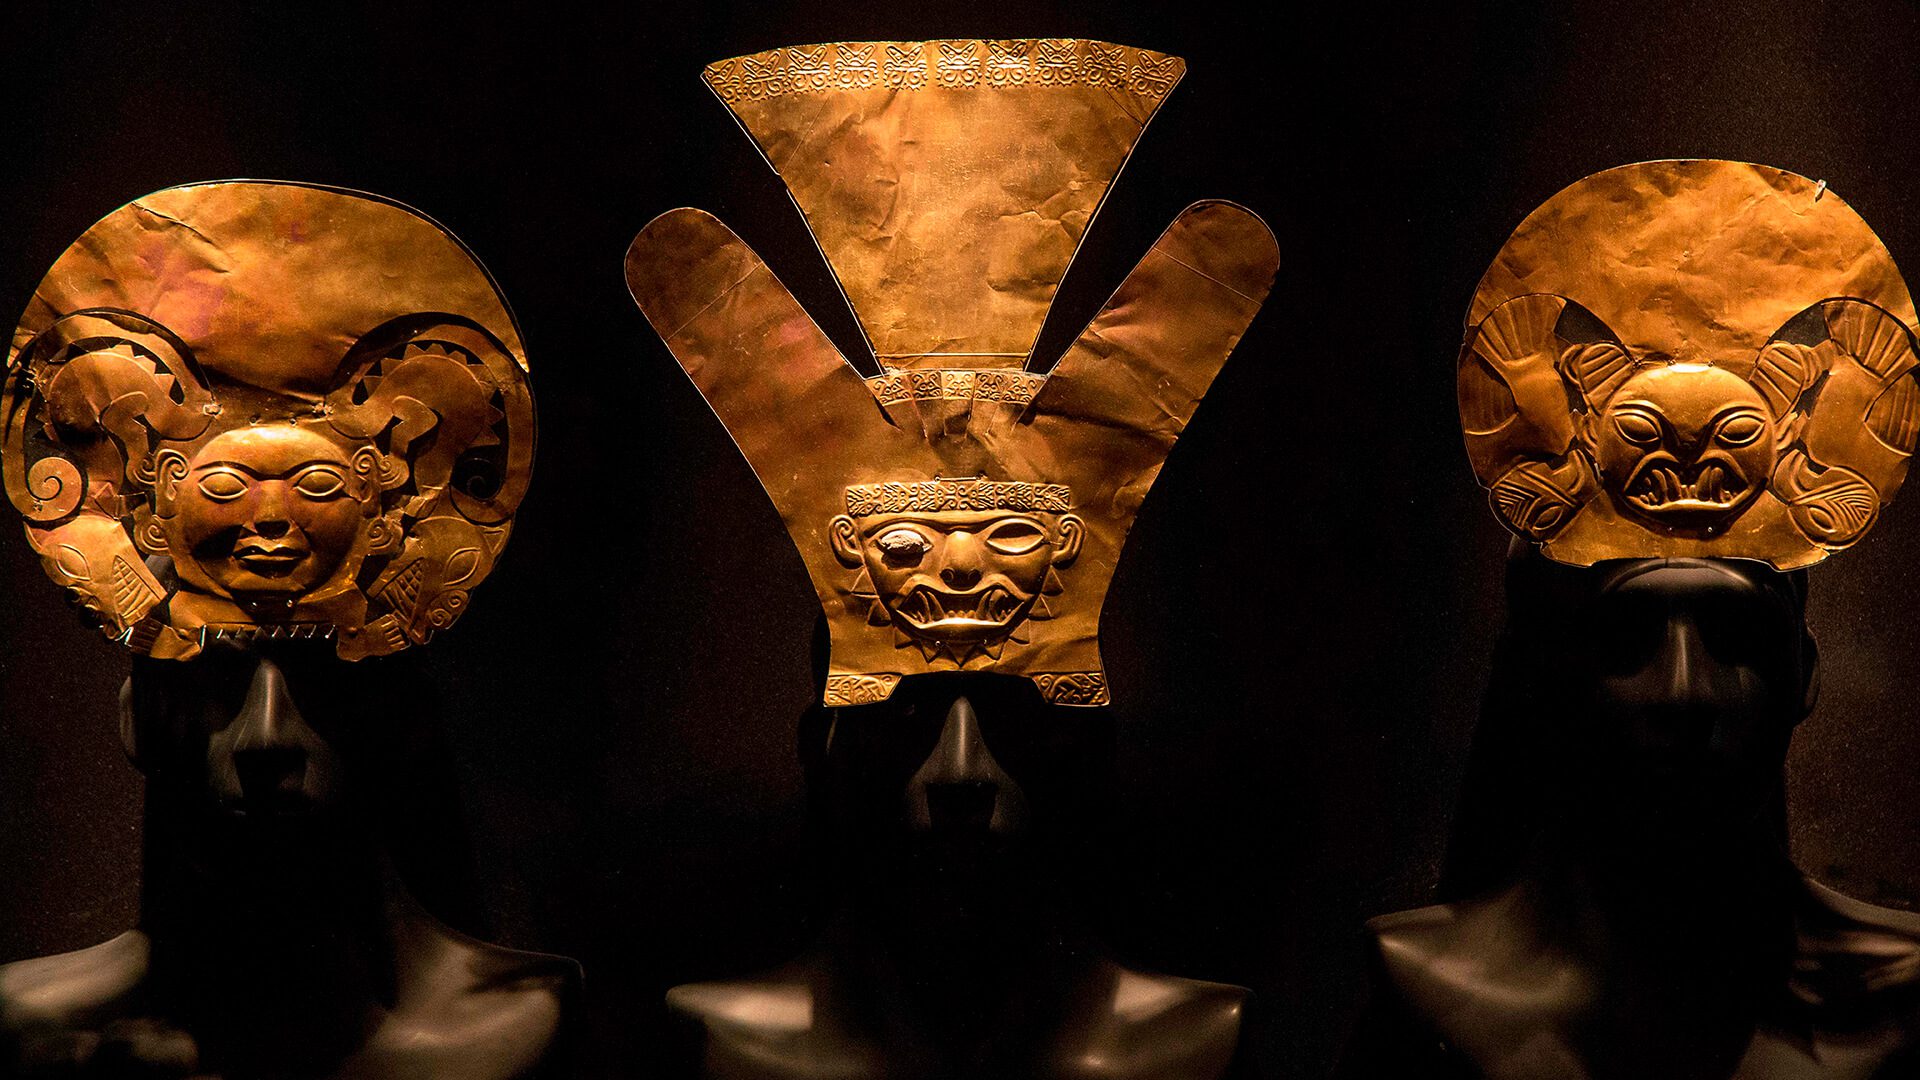 Mochica gold head-ornaments in display at Museo Larco permanent collection | RESPONSible Travel Peru